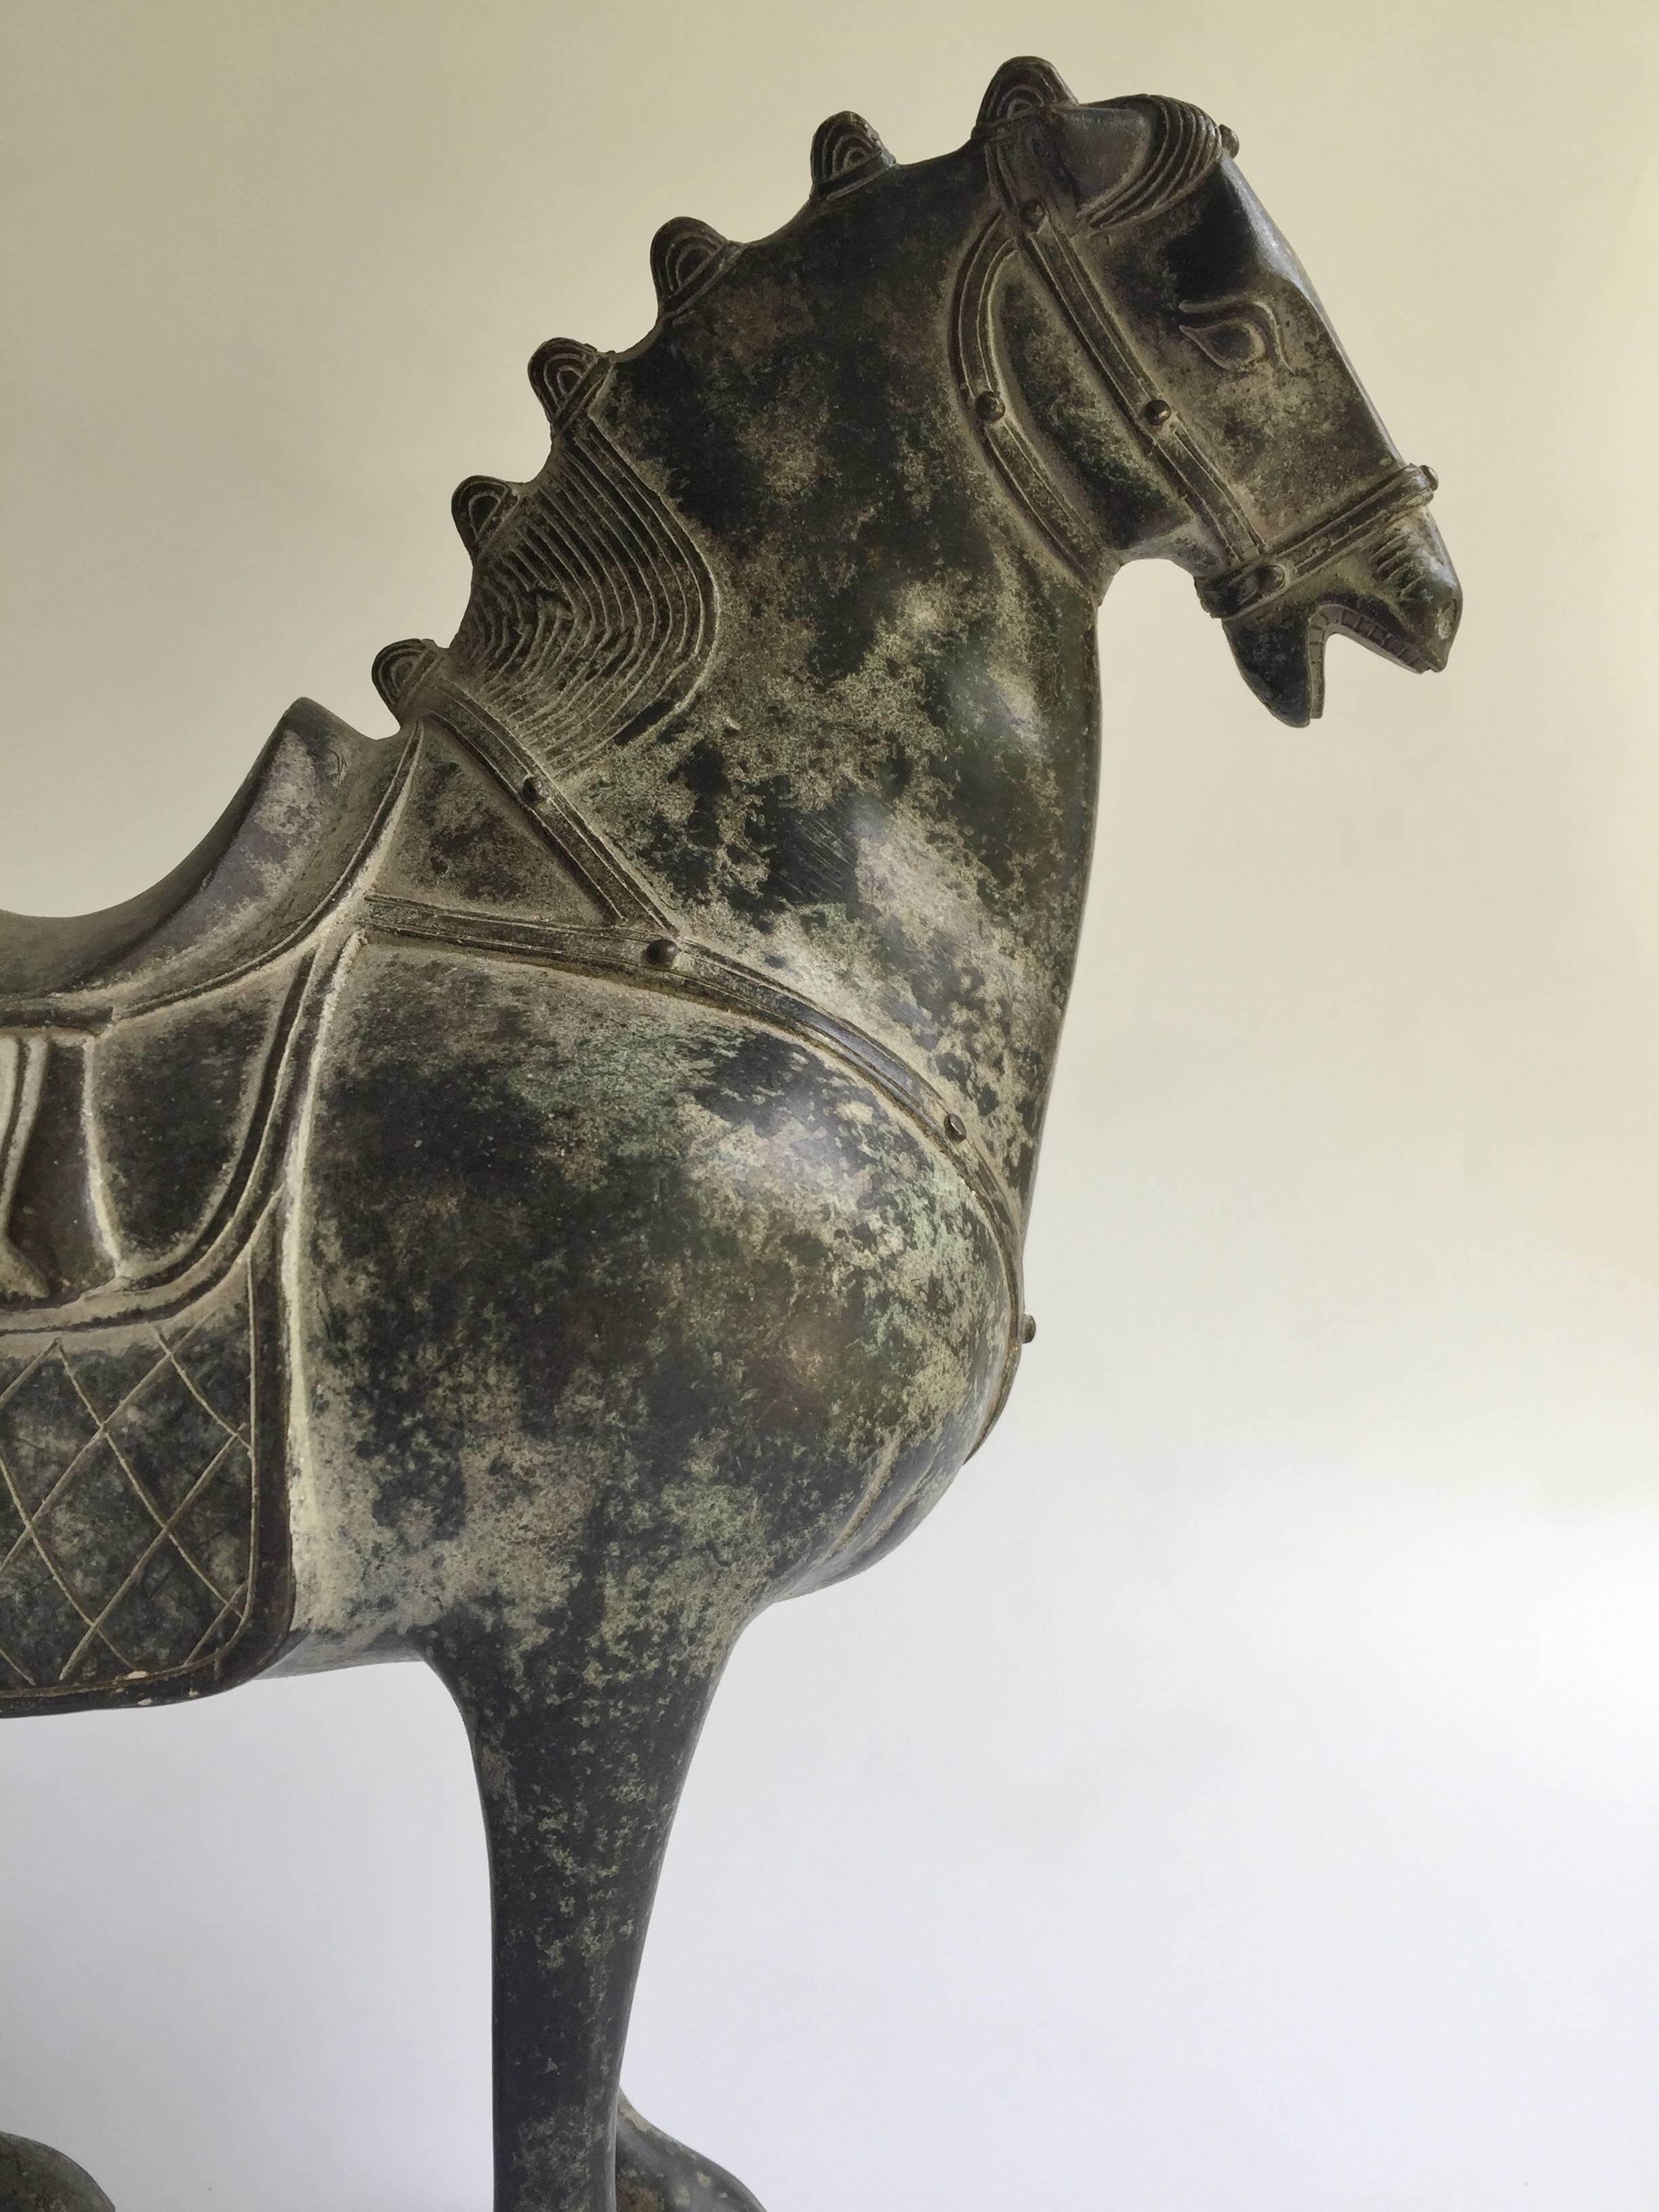 Magnificent bronze horse in the ancient Han style. The piece's craftsmanship is superb with Fine details. The horse's expression is vivid and lively, his muscles well defined and powerful. His accessories are exquisite.

Horse in the Chinese